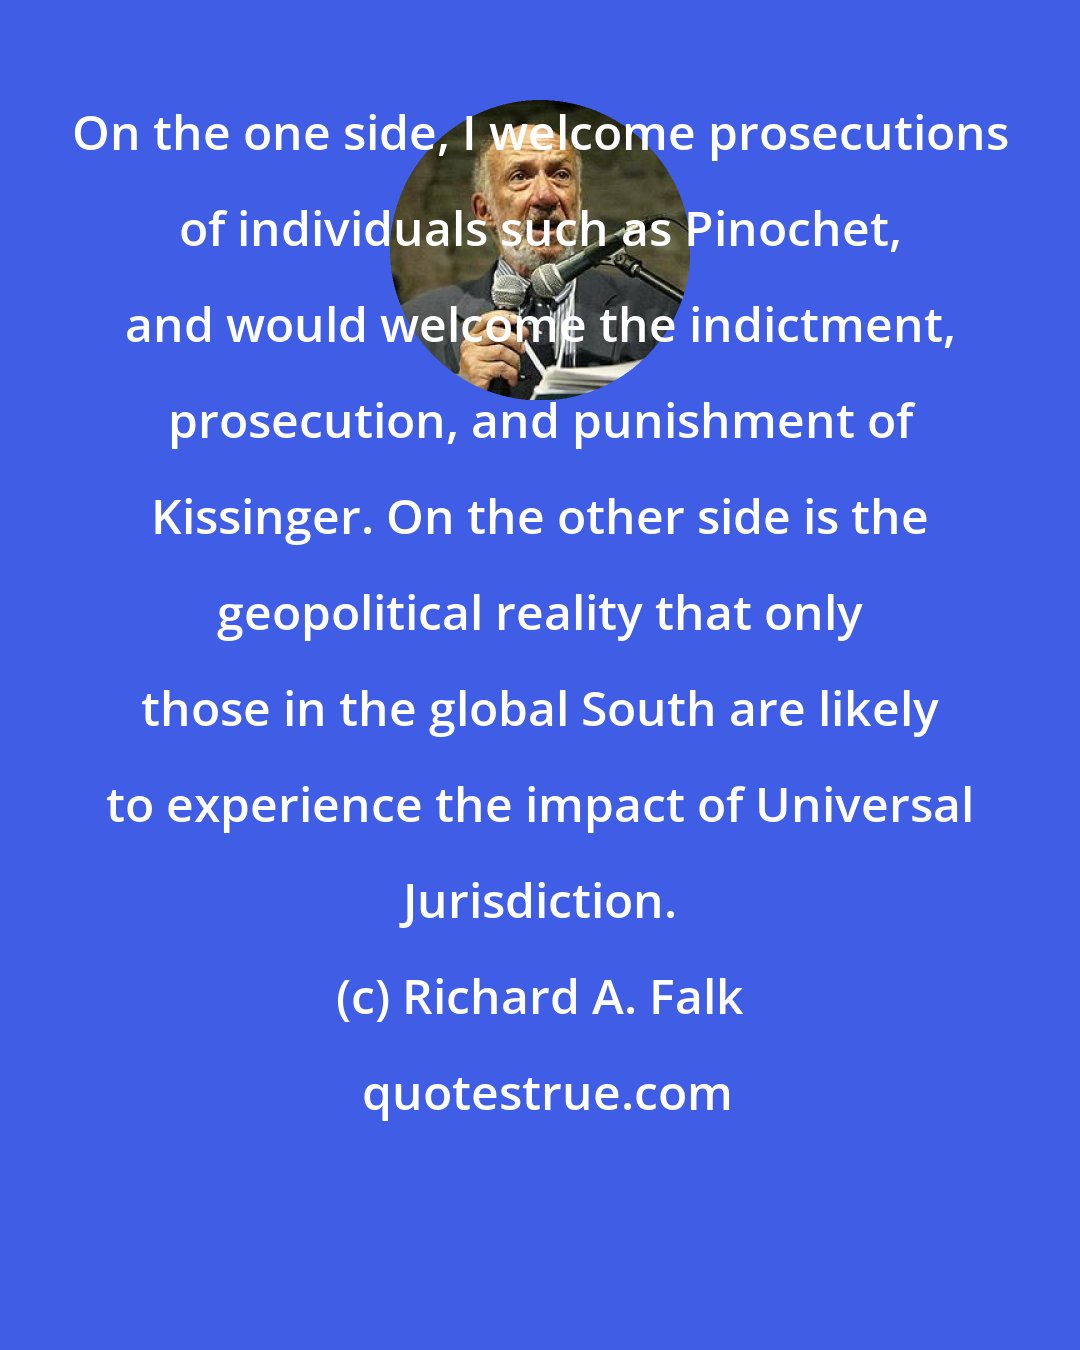 Richard A. Falk: On the one side, I welcome prosecutions of individuals such as Pinochet, and would welcome the indictment, prosecution, and punishment of Kissinger. On the other side is the geopolitical reality that only those in the global South are likely to experience the impact of Universal Jurisdiction.